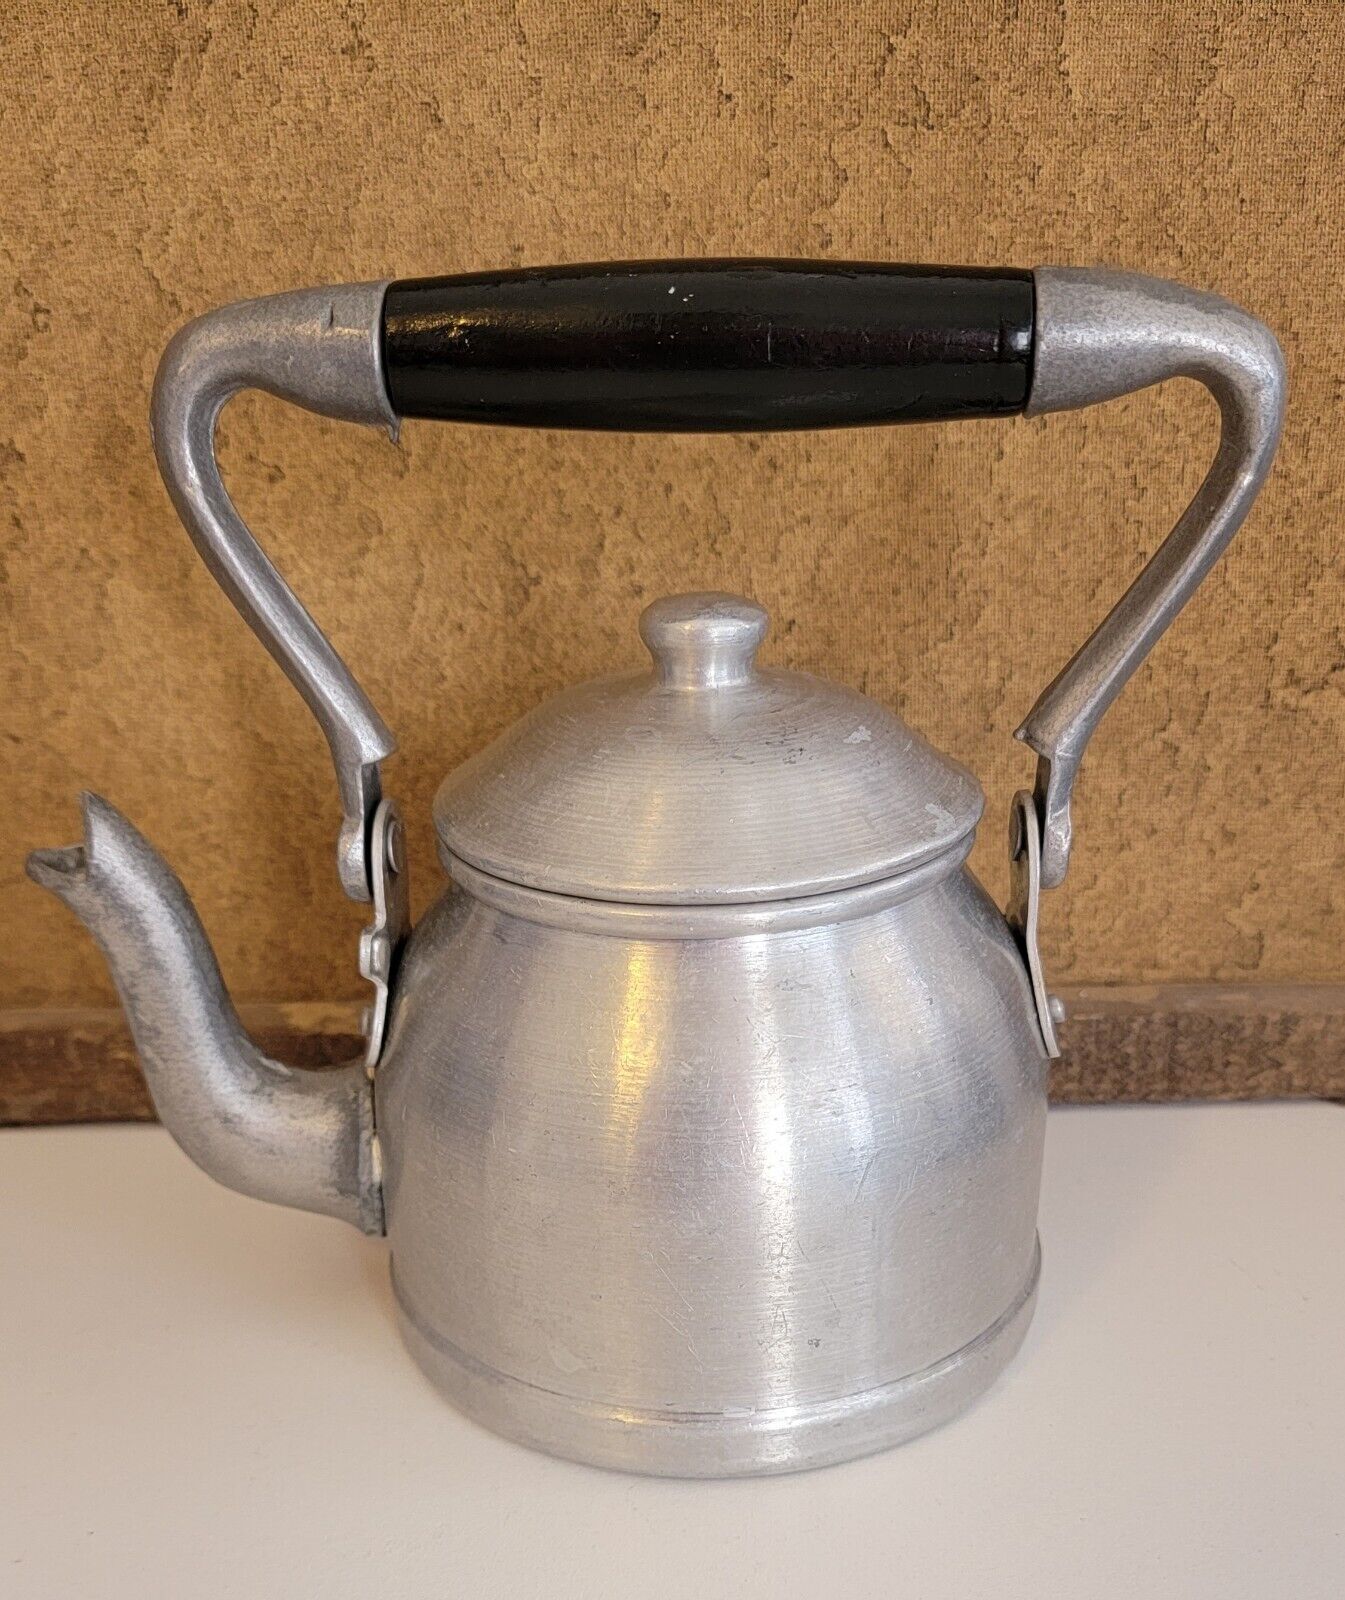 Vintage Aluminum Childs Play Teapot Made in Italy ~ Creative Playthings